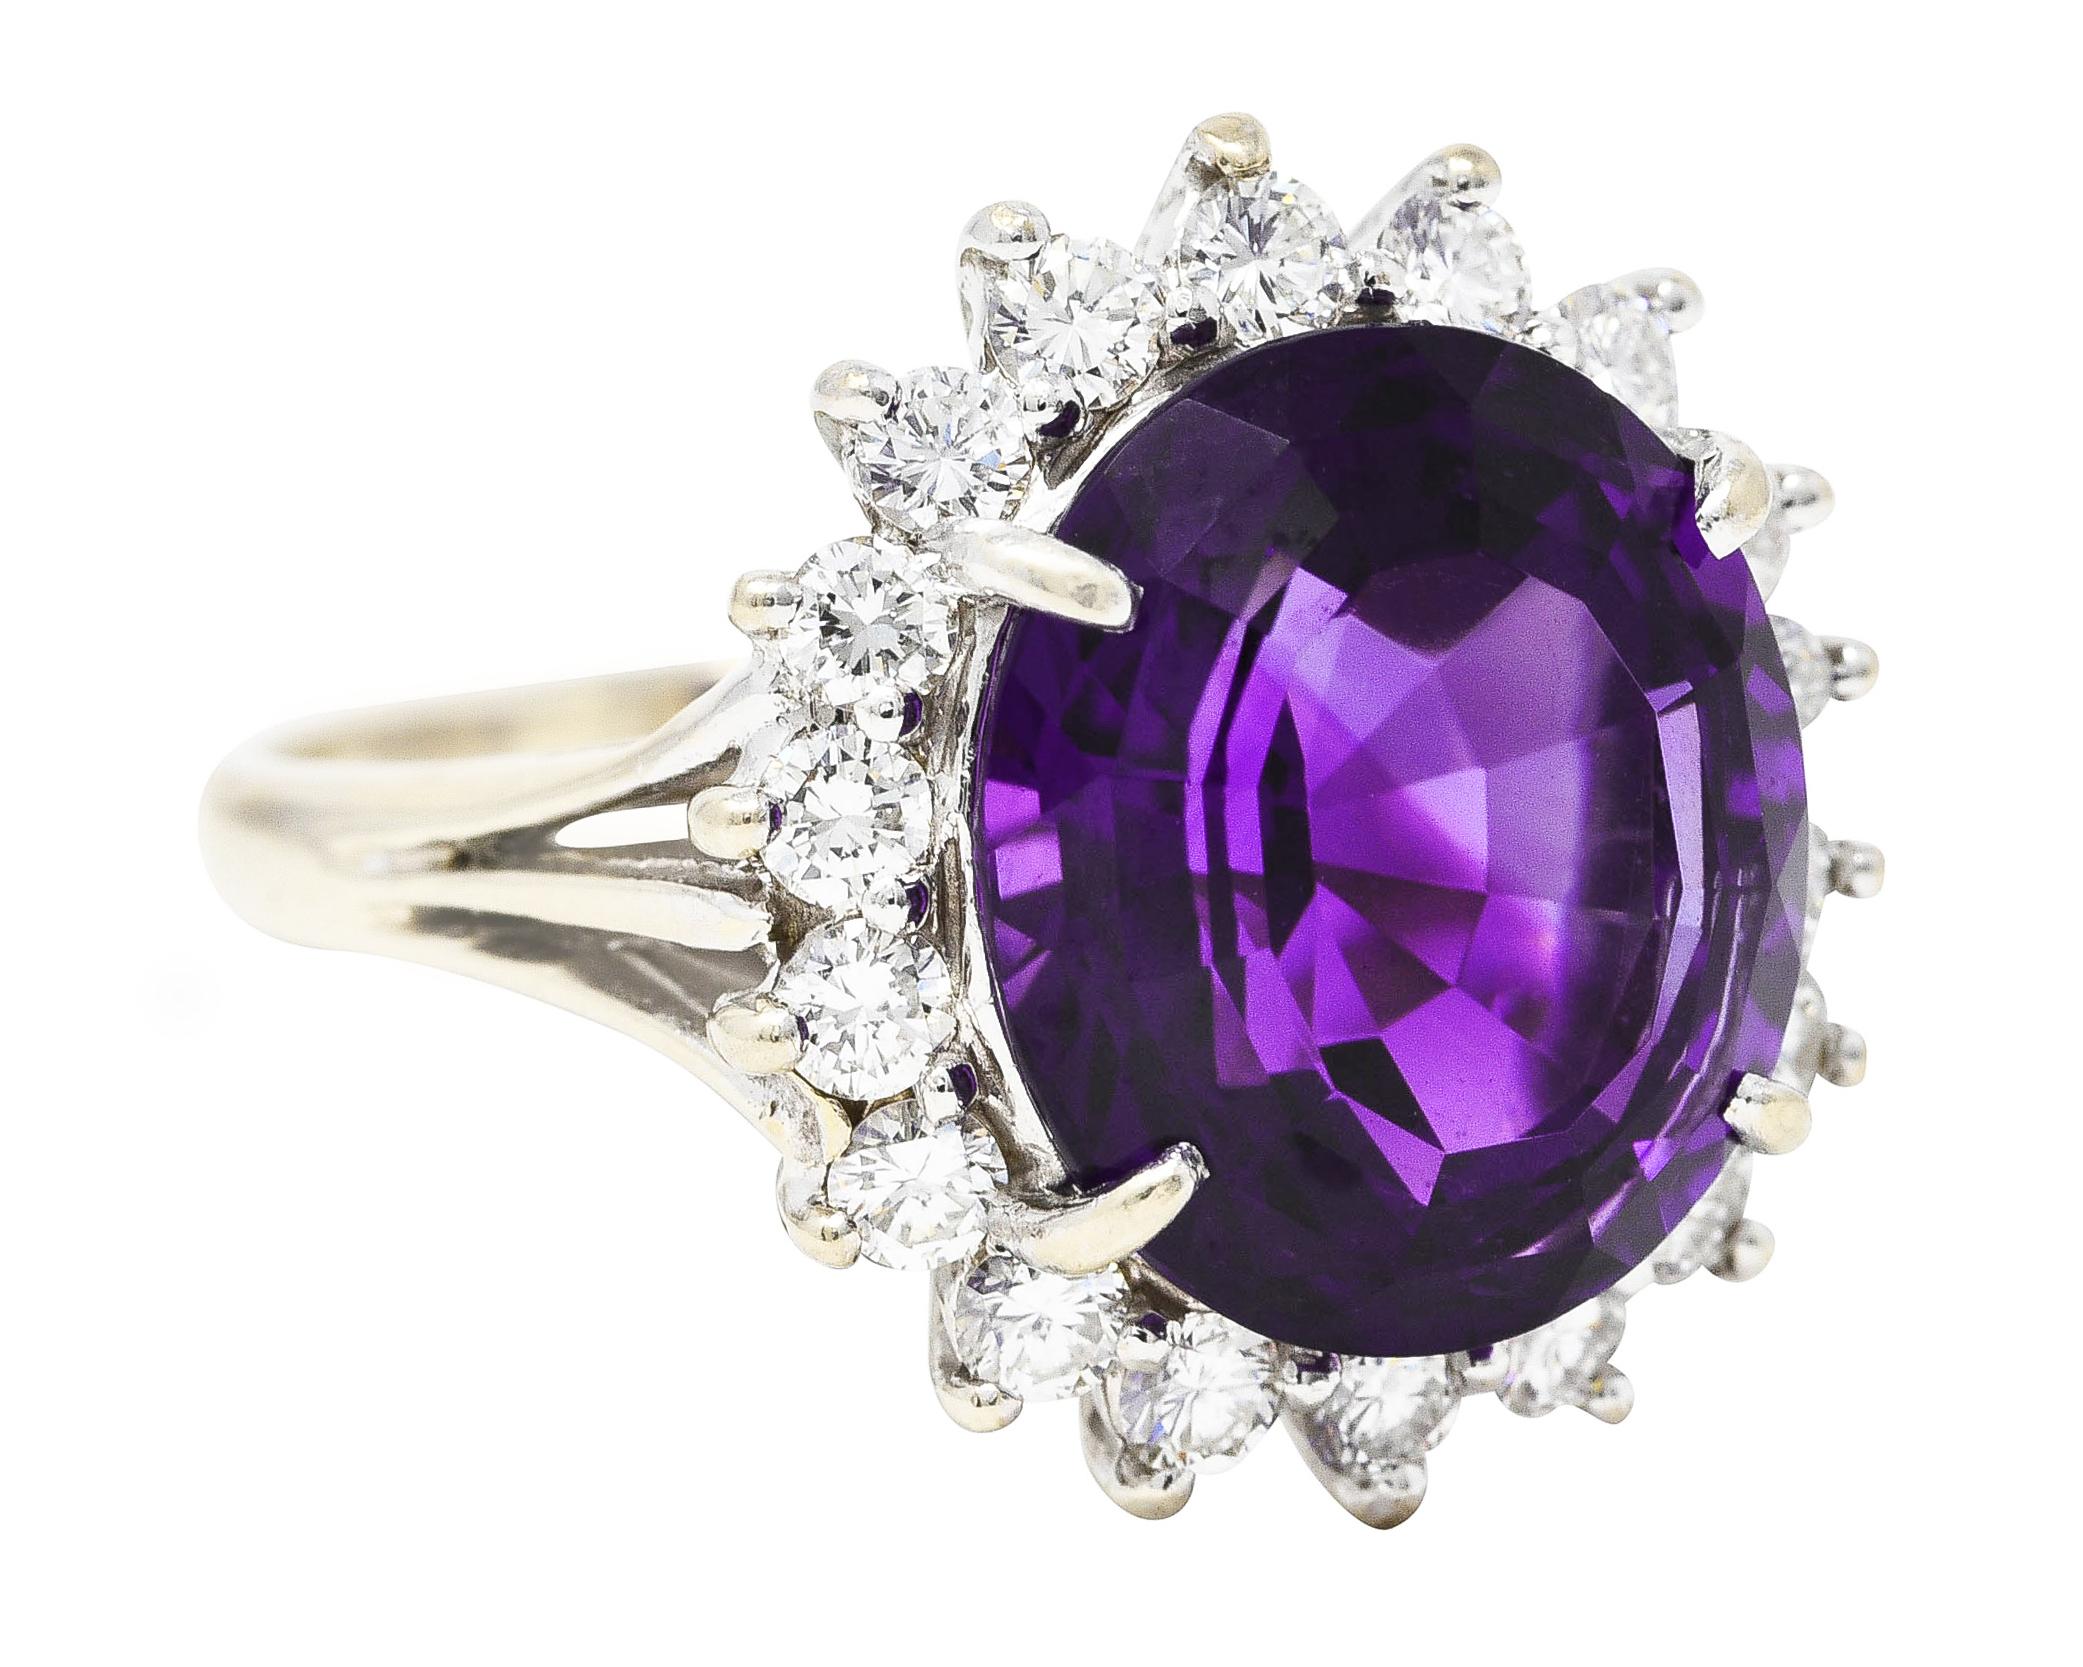 Cluster ring centers a checkerboard oval cut amethyst measuring 13.7 x 11.9 mm. Surrounded by a halo of round brilliant cut diamonds. Weighing collectively approximately 1.00 carat - G to I color with VS2 clarity. Completed by triple split cathedral